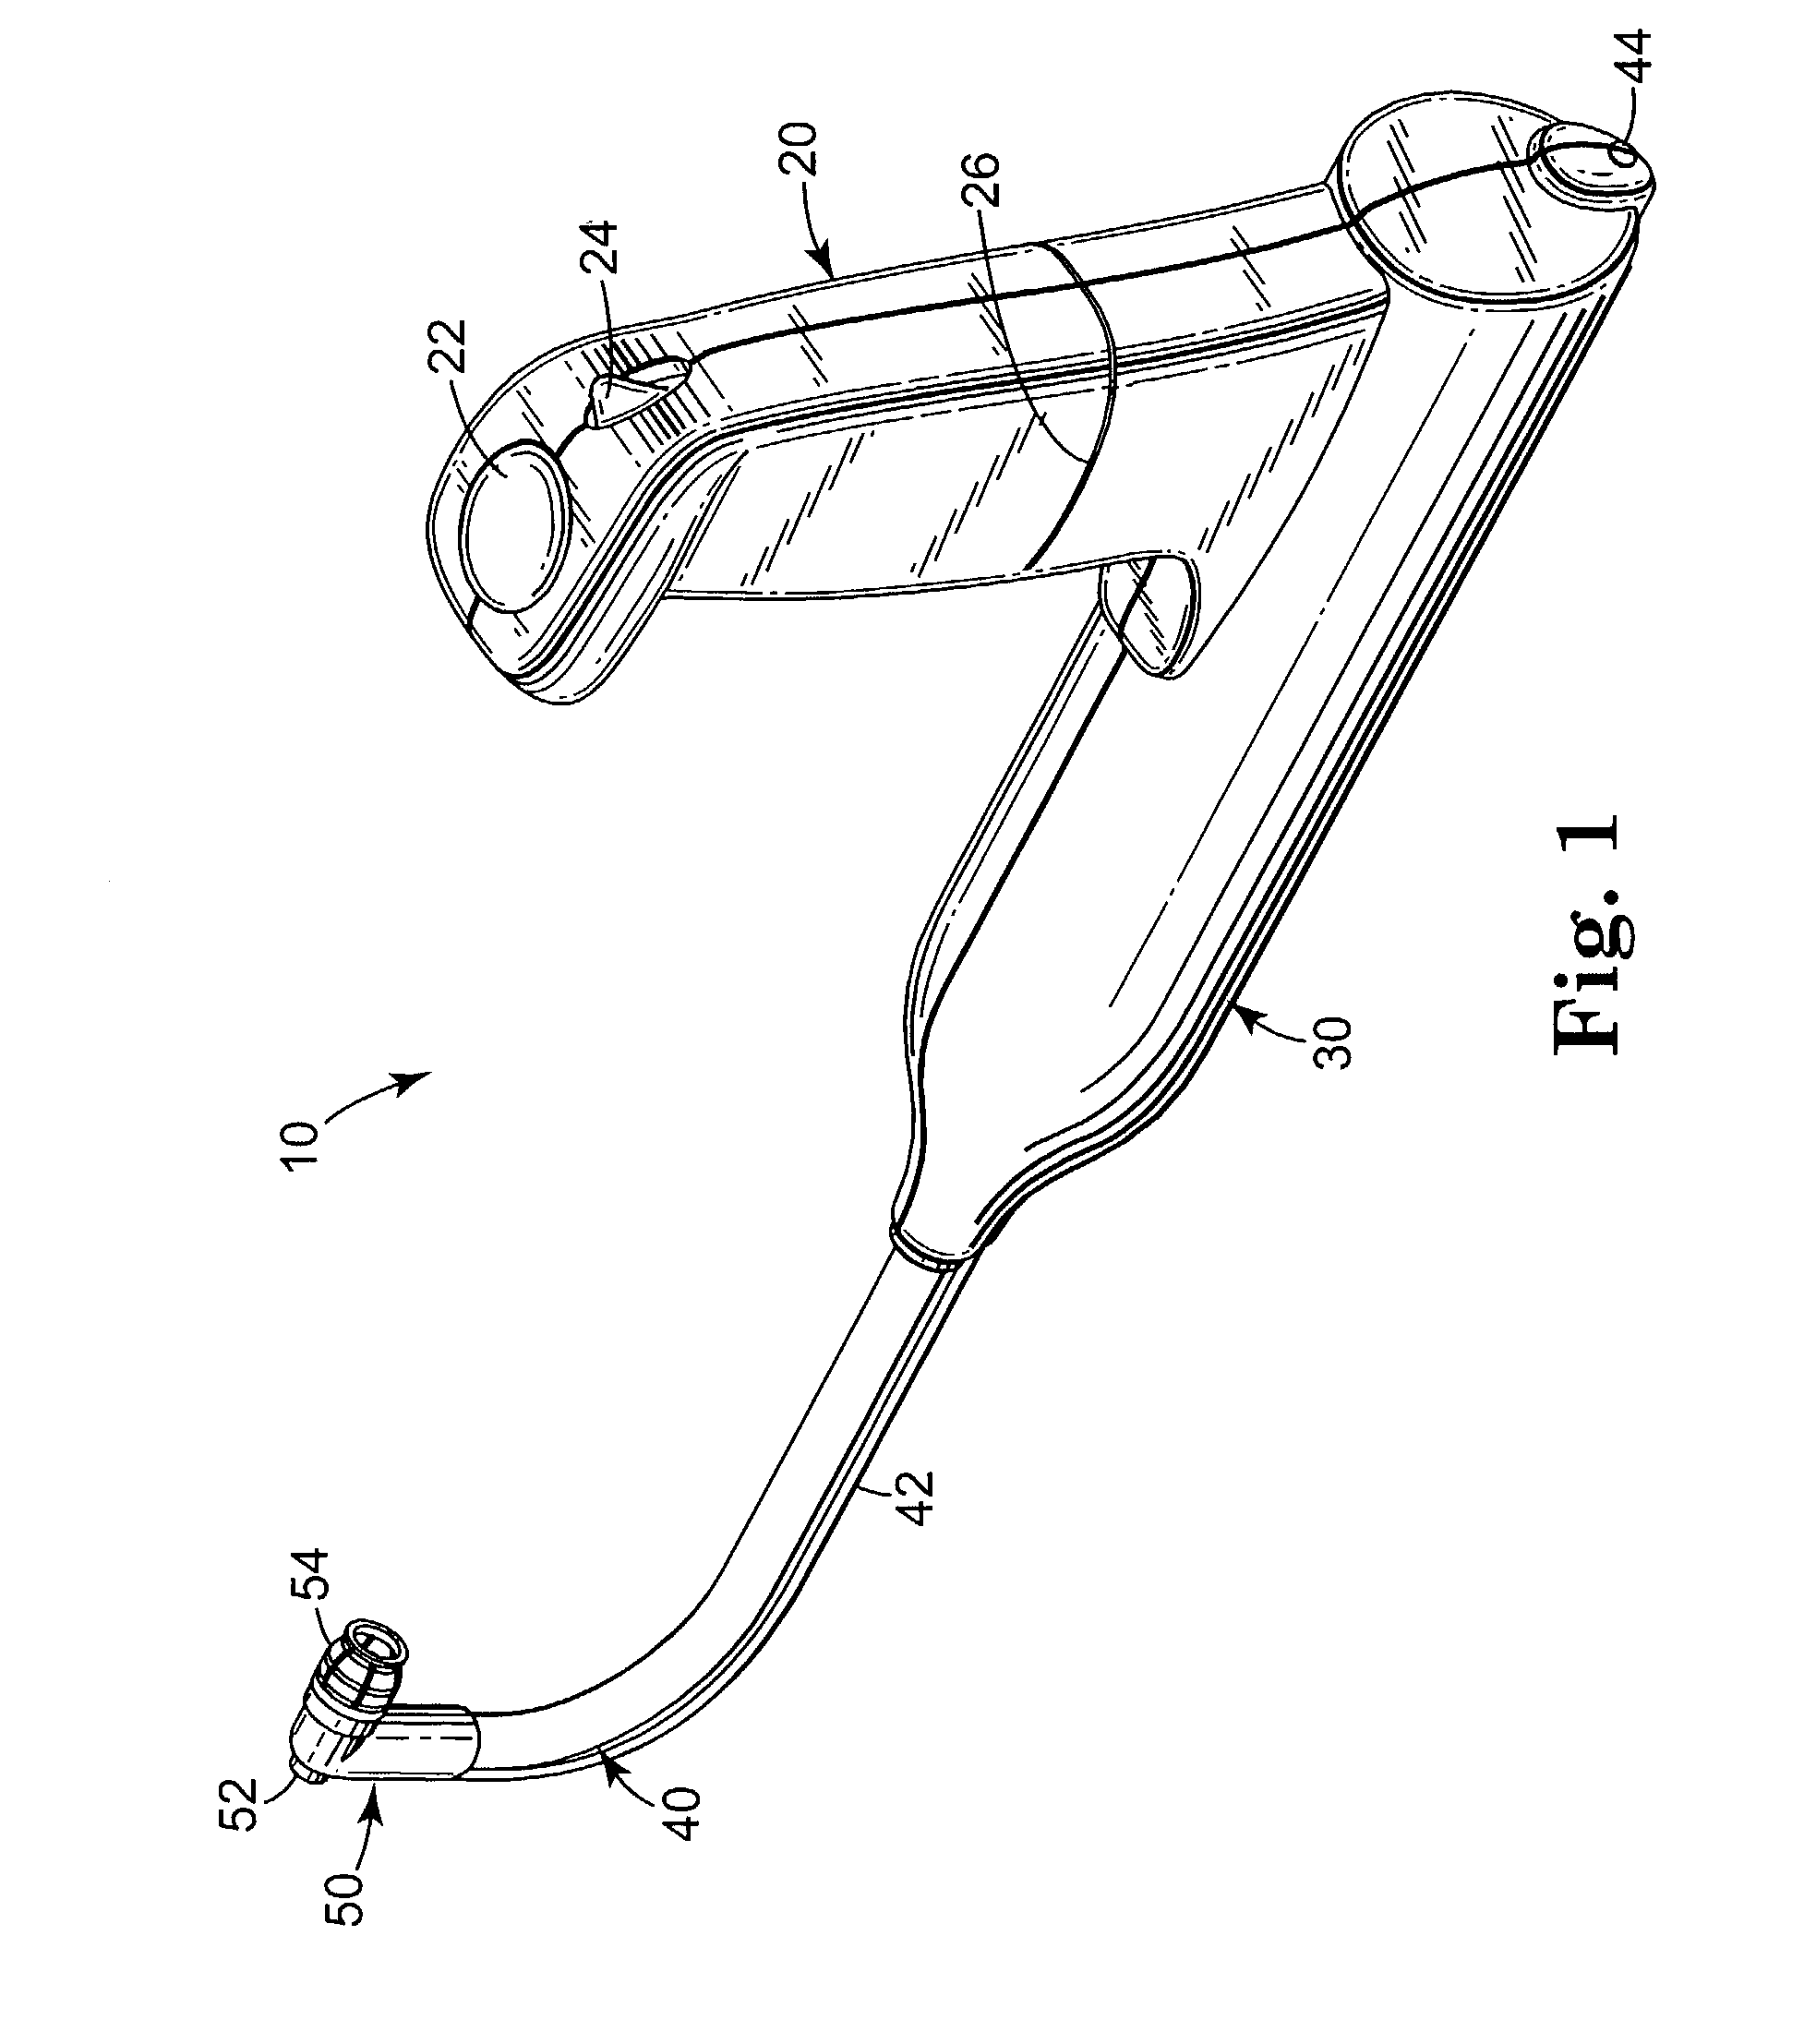 Bone anchor inserters and methods